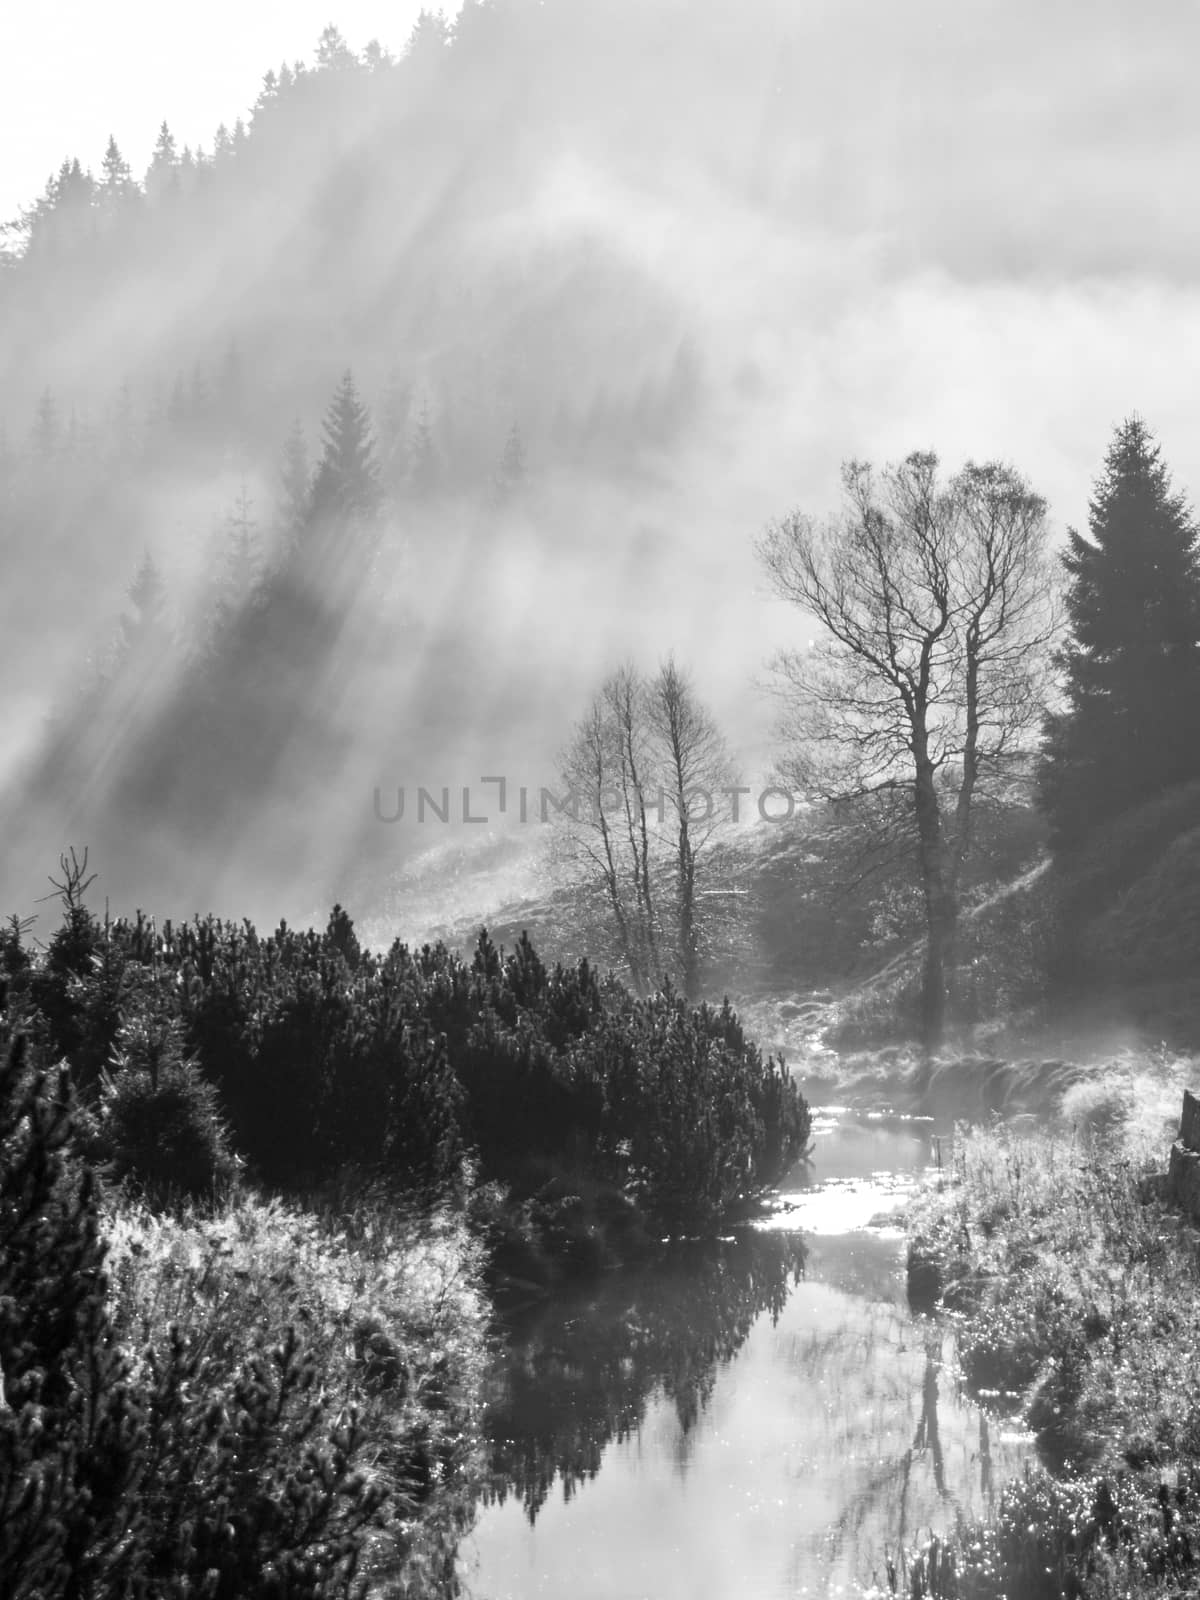 Misty morning in the nature. Sun beams light through fog with tree silhouettes. Water reflection. Black and white image.